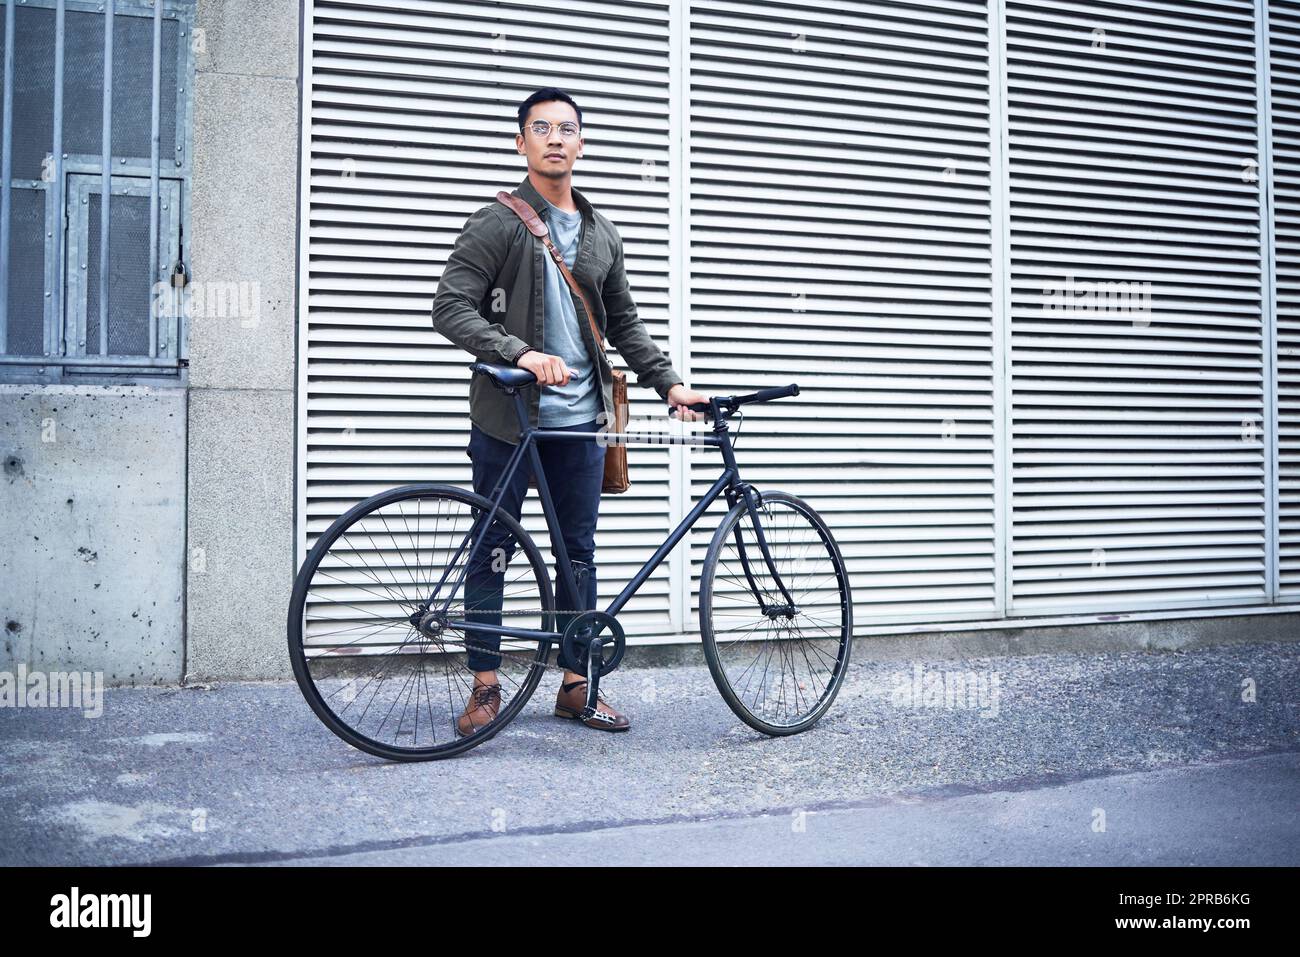 Ill just stand here in the middle of nowhere. a young man posing with a bicycle in the city. Stock Photo